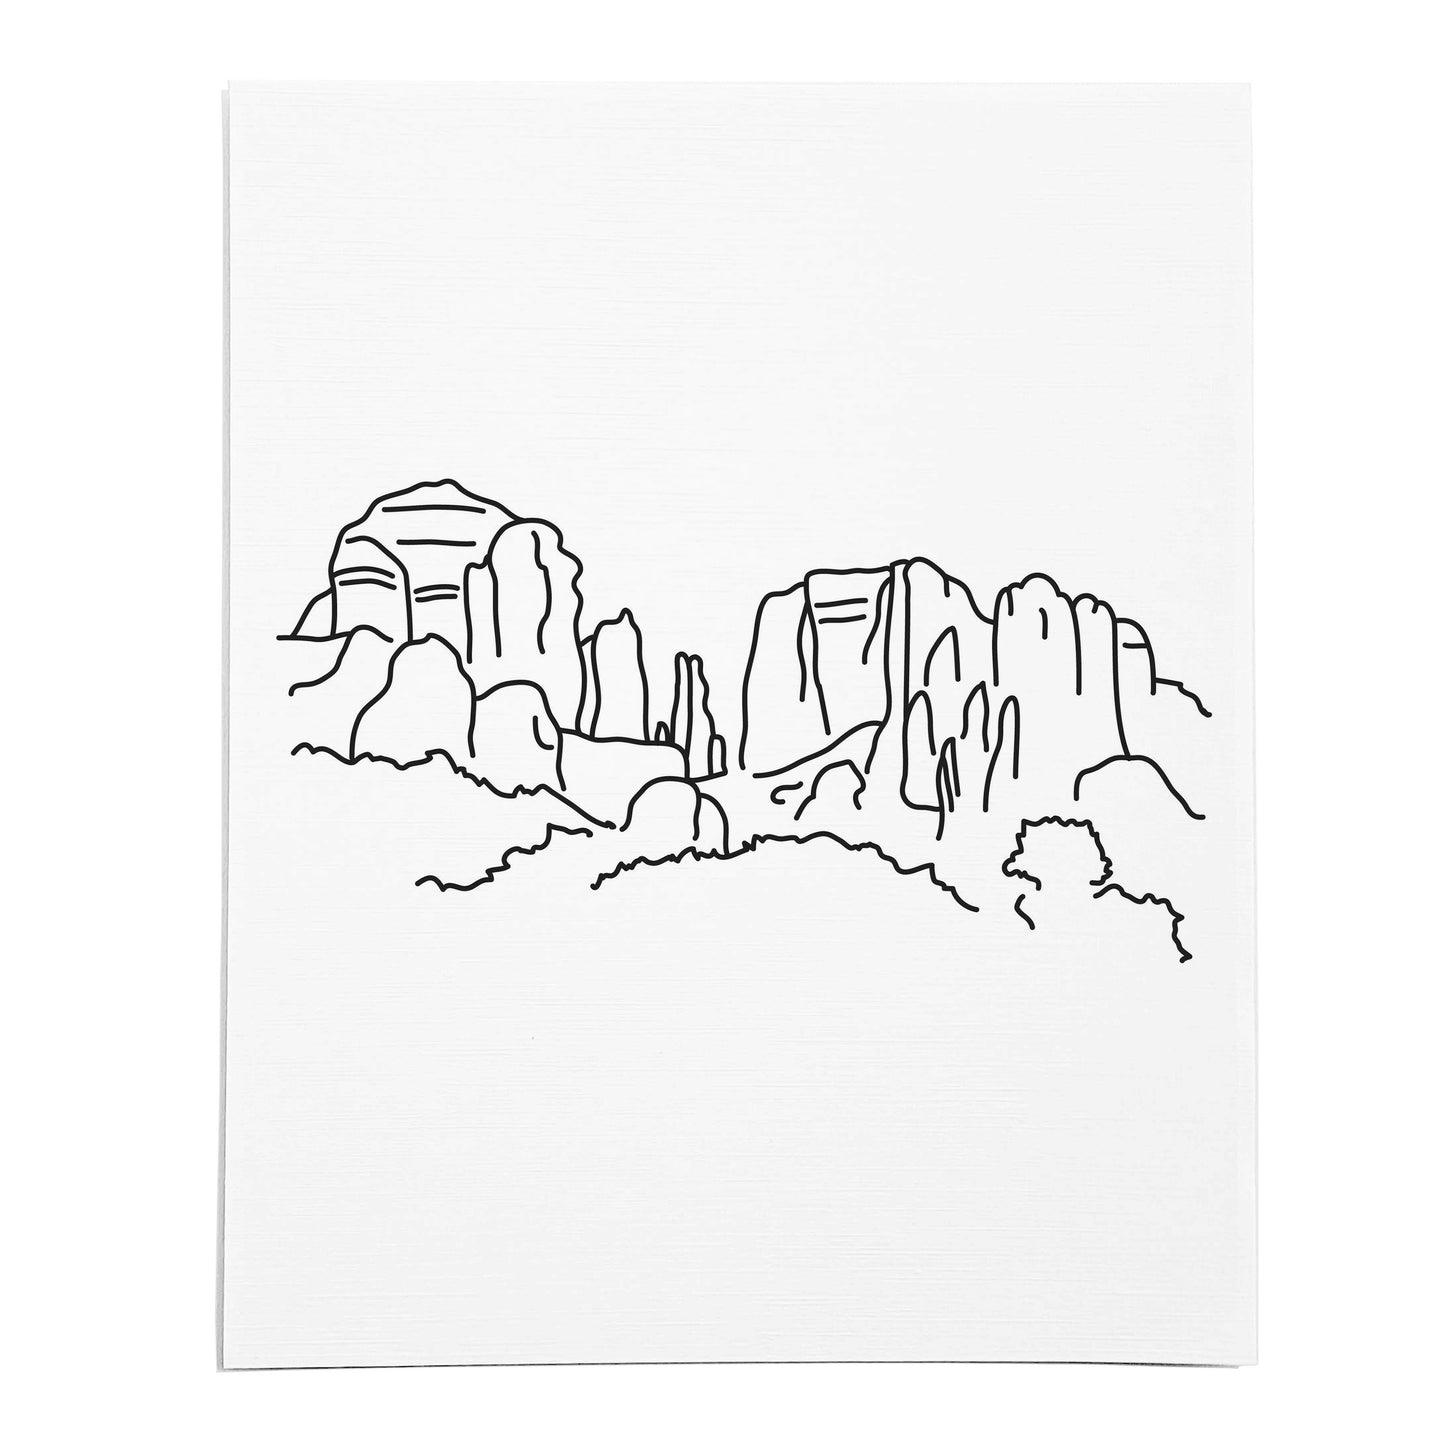 An art print featuring a line drawing of Cathedral Rock on white linen paper